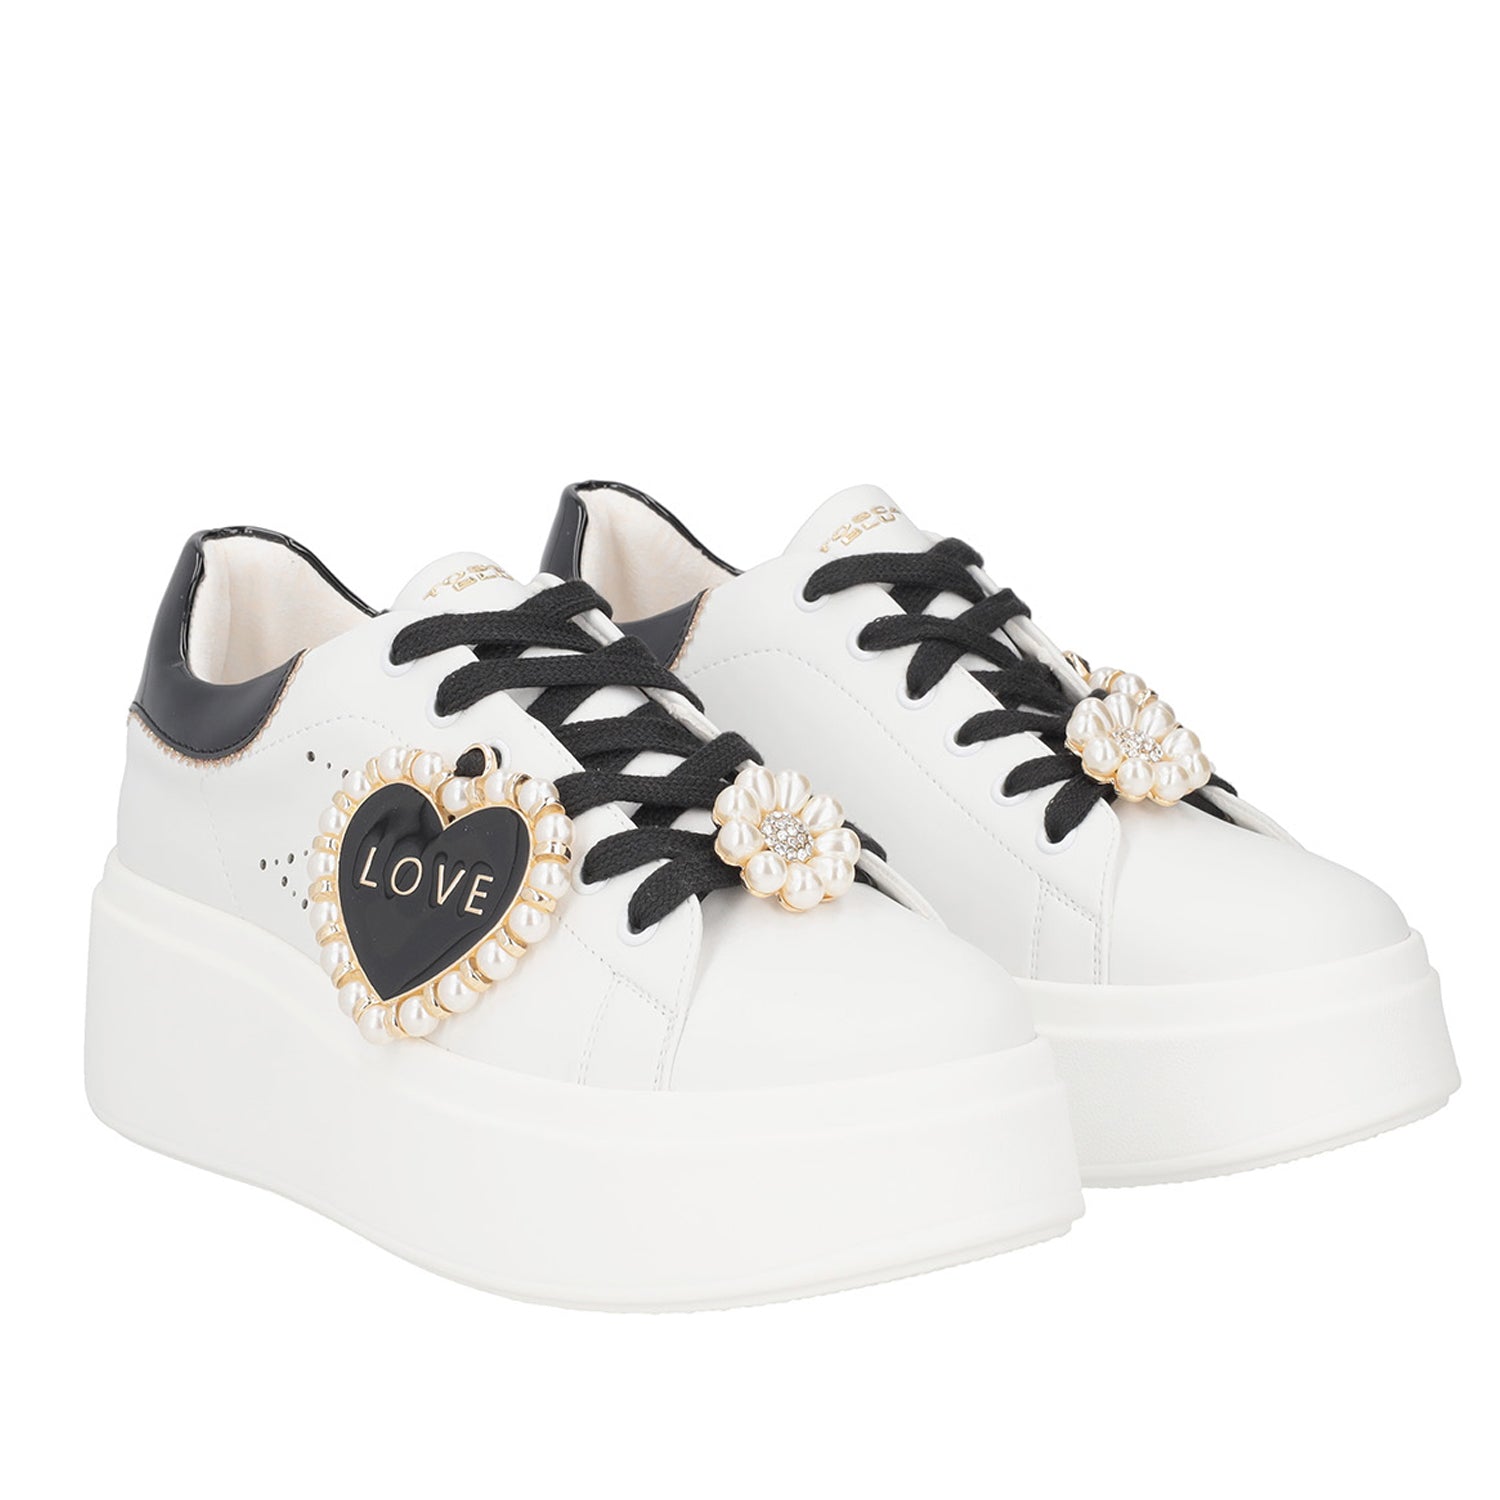 WHITE/BLACK VANITY SNEAKER WITH HEARTS AND PEARLS